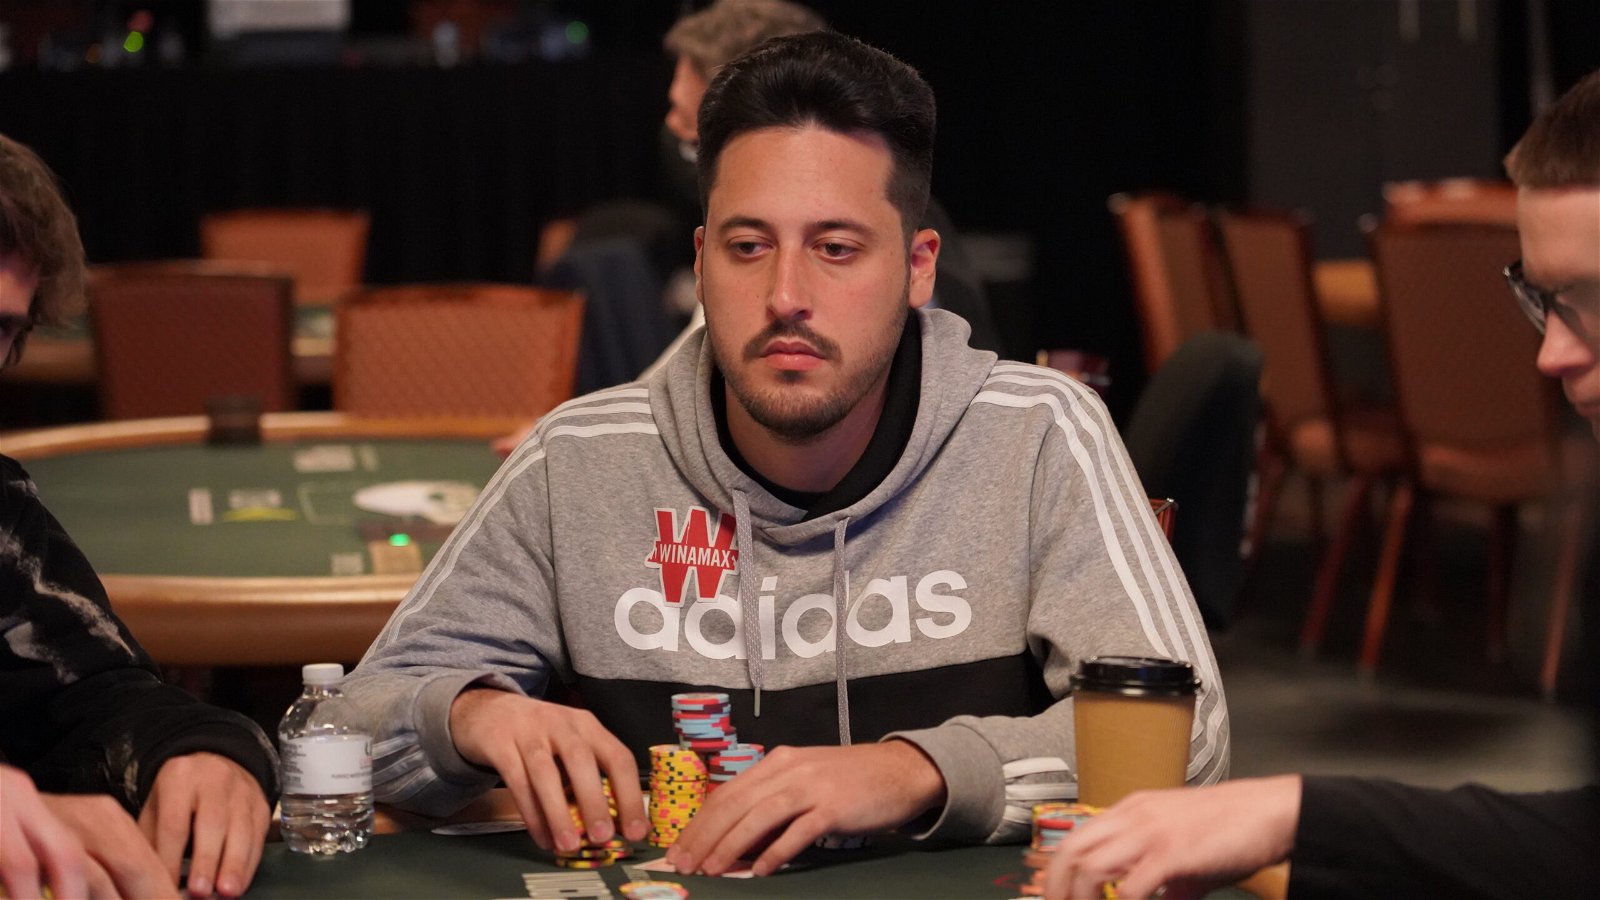 Spanish professional poker player and four-time World Series of Poker bracelet winner Adrian Mateos playing at the WSOP.